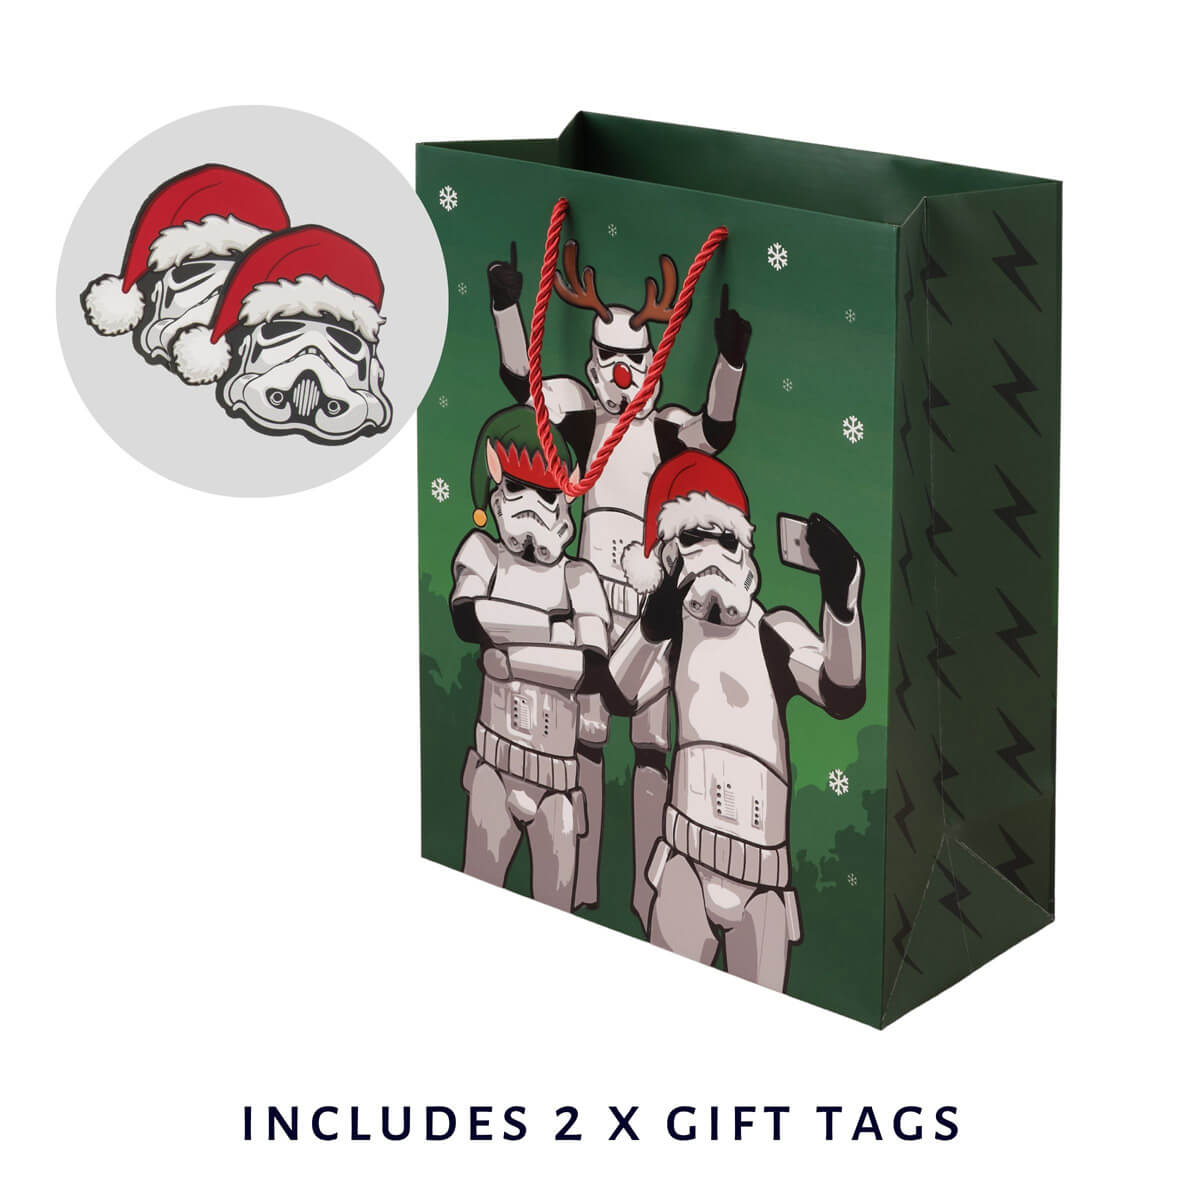 Original Stormtrooper Christmas Gift Bag - Large size - close up image of green gift bag with stormtroopers taking a selfie with santa hats on